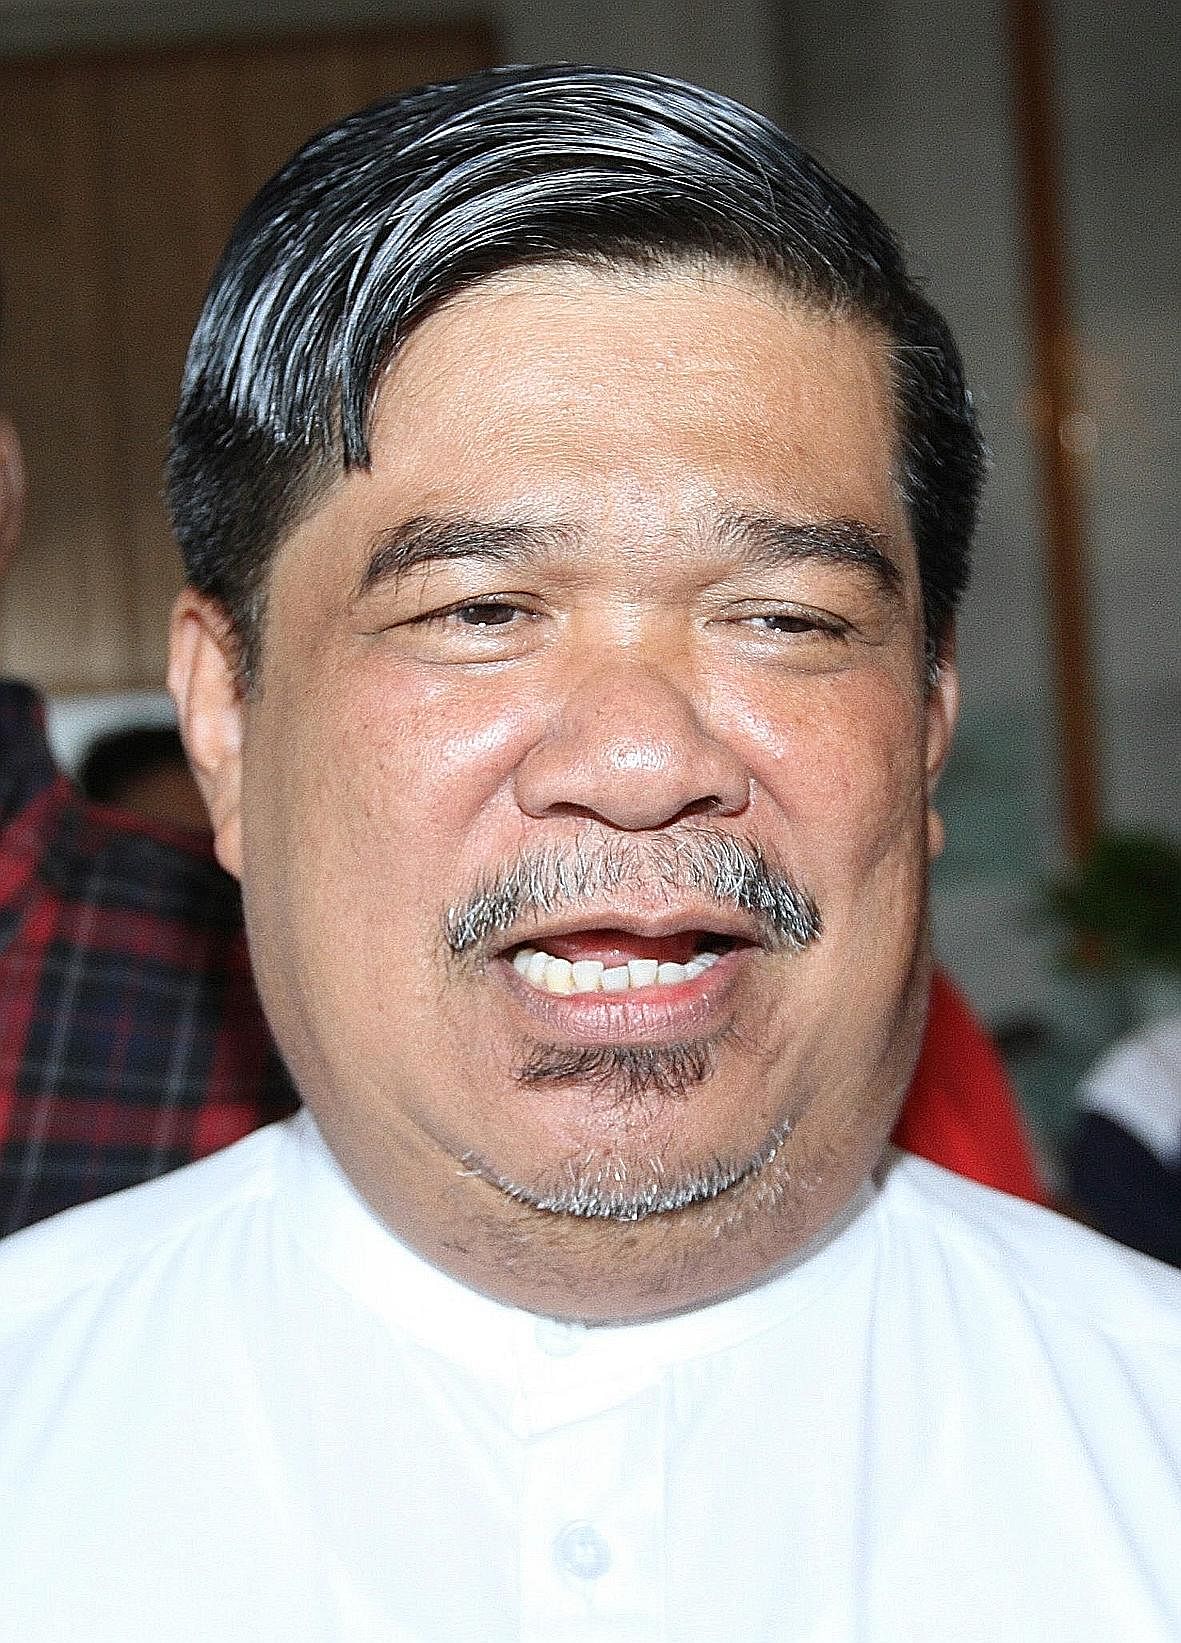 Mr Mohamad Sabu is the leader of the informal group called G18, which was set up by PAS progressives.